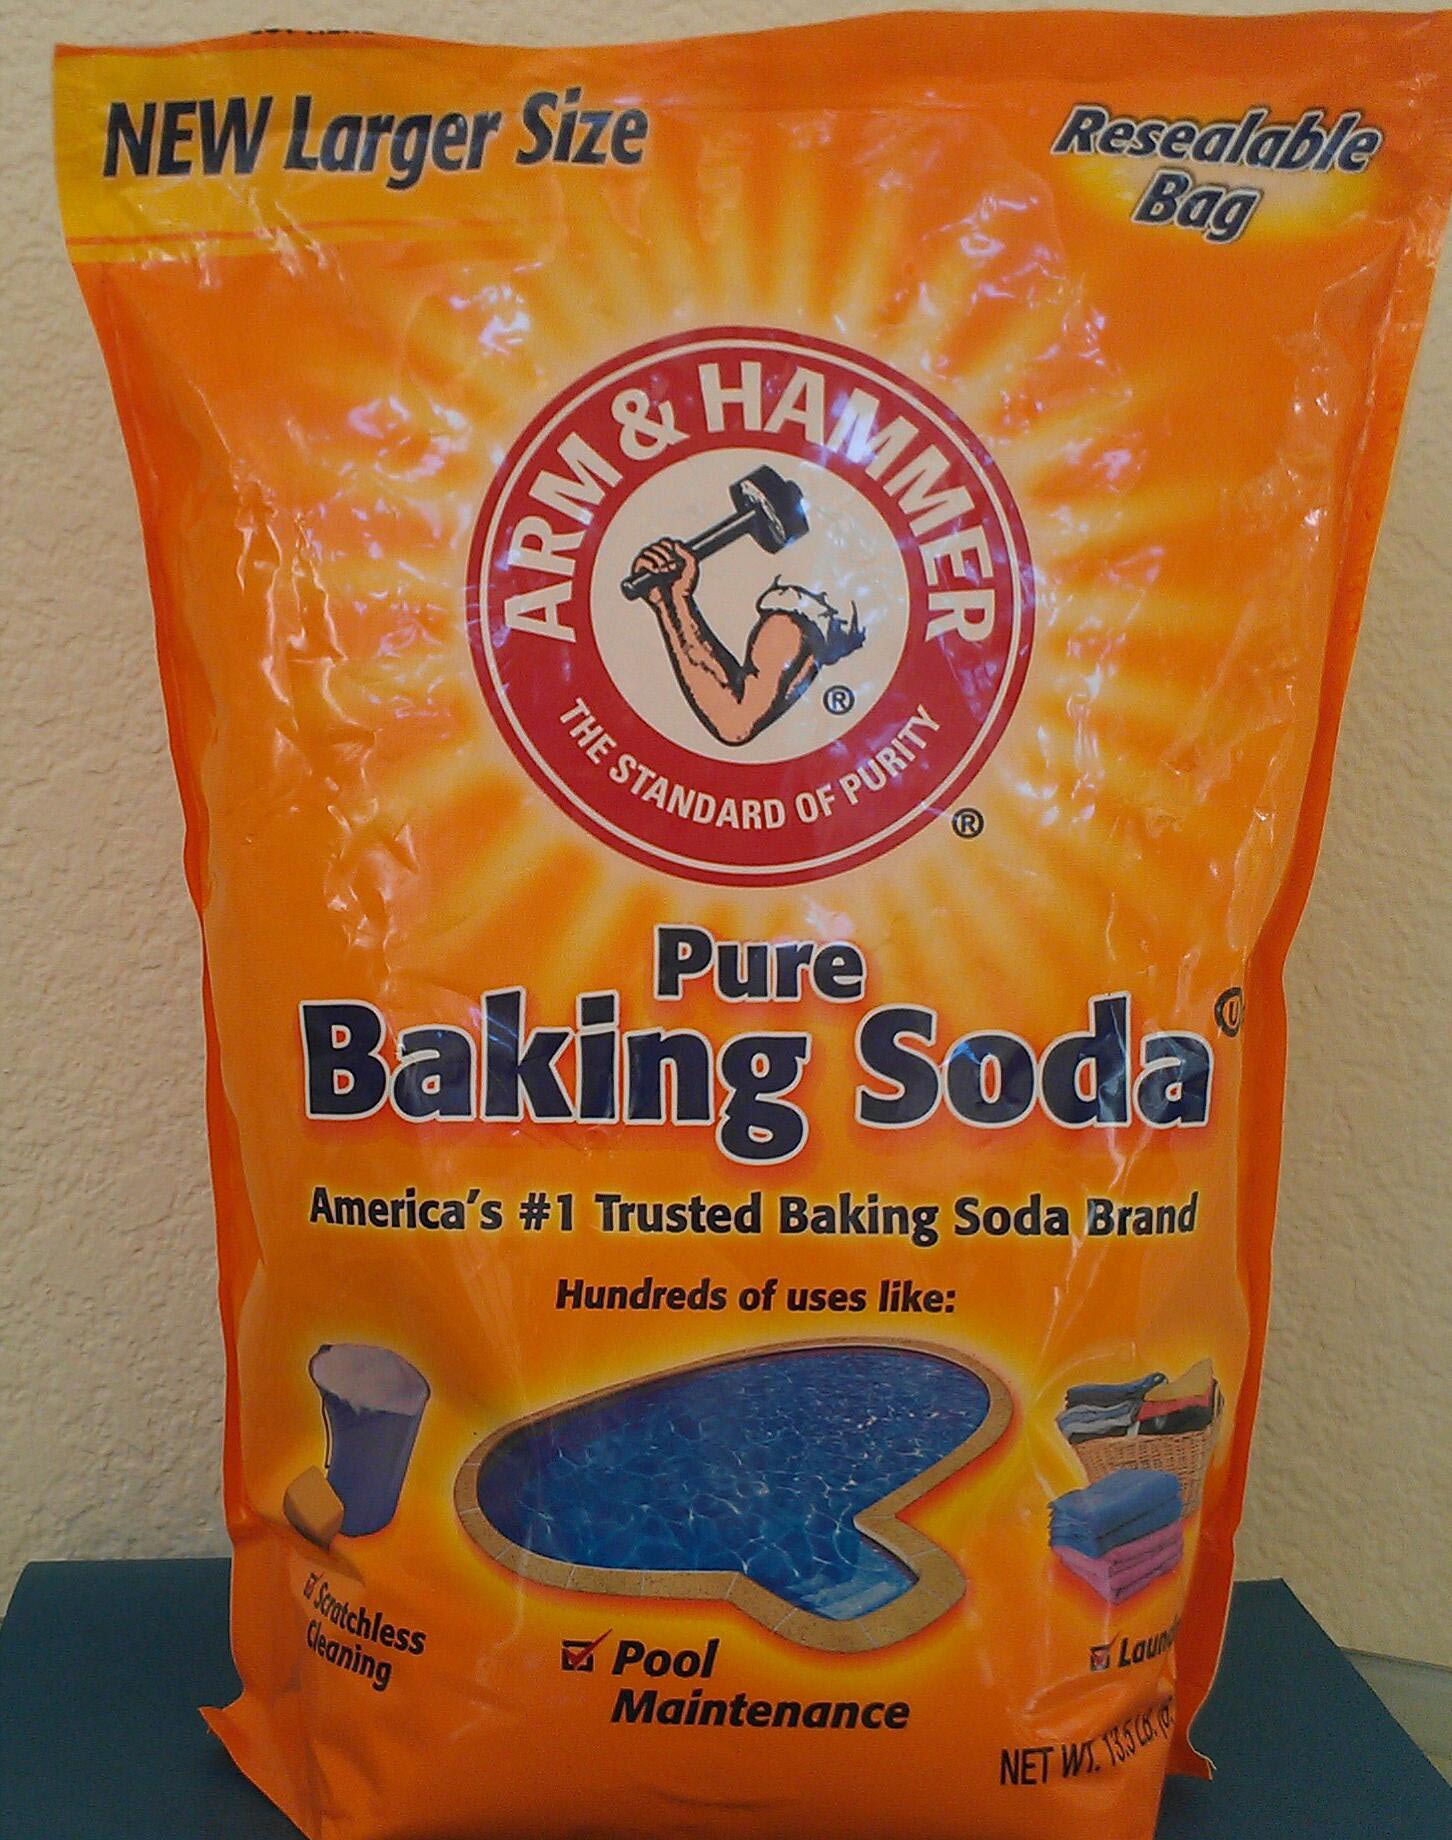 Green Cleaning Products You Can Make with Baking Soda